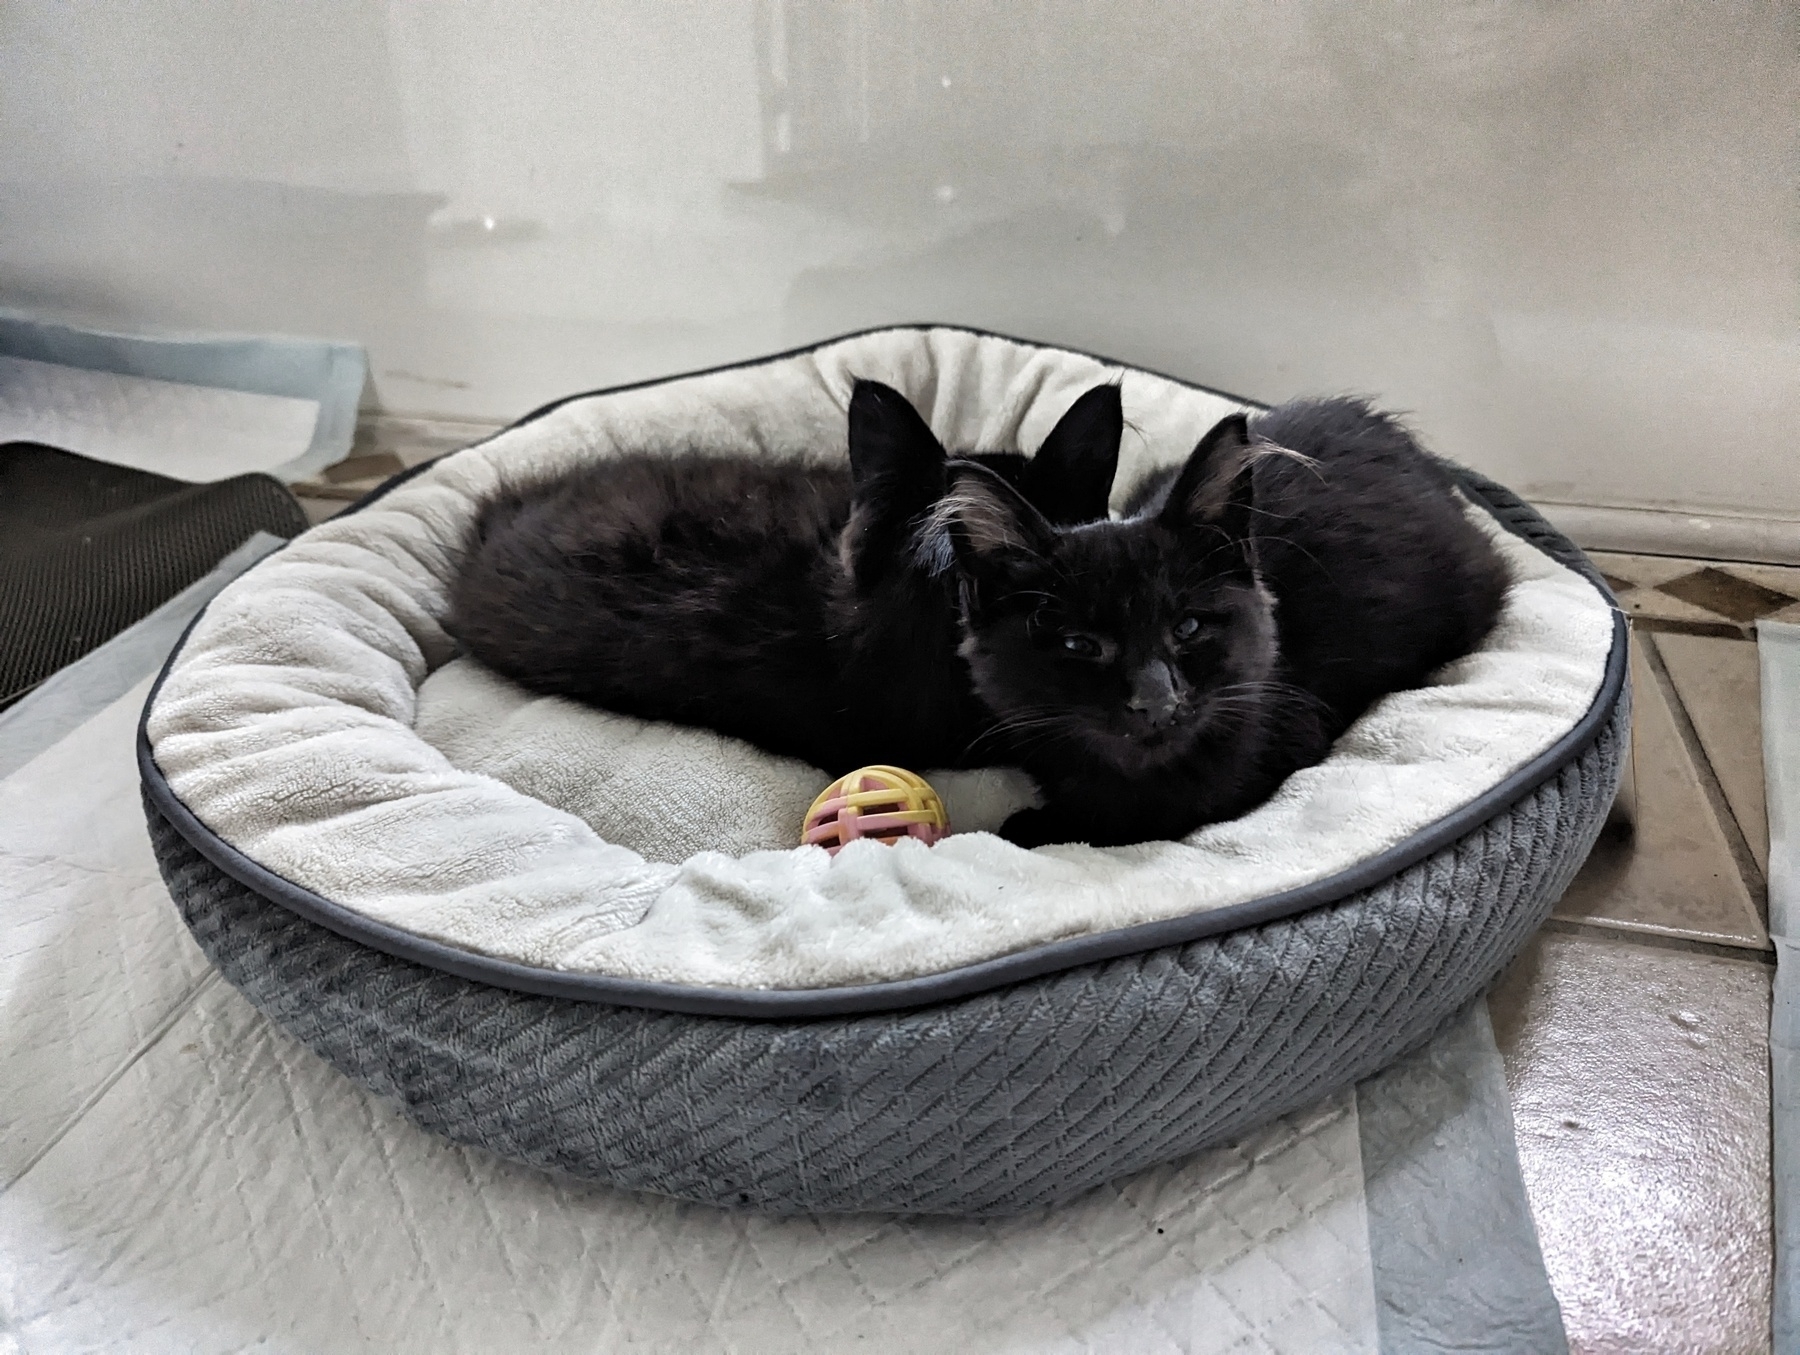 Two black kittens snuggle in a pet bed.